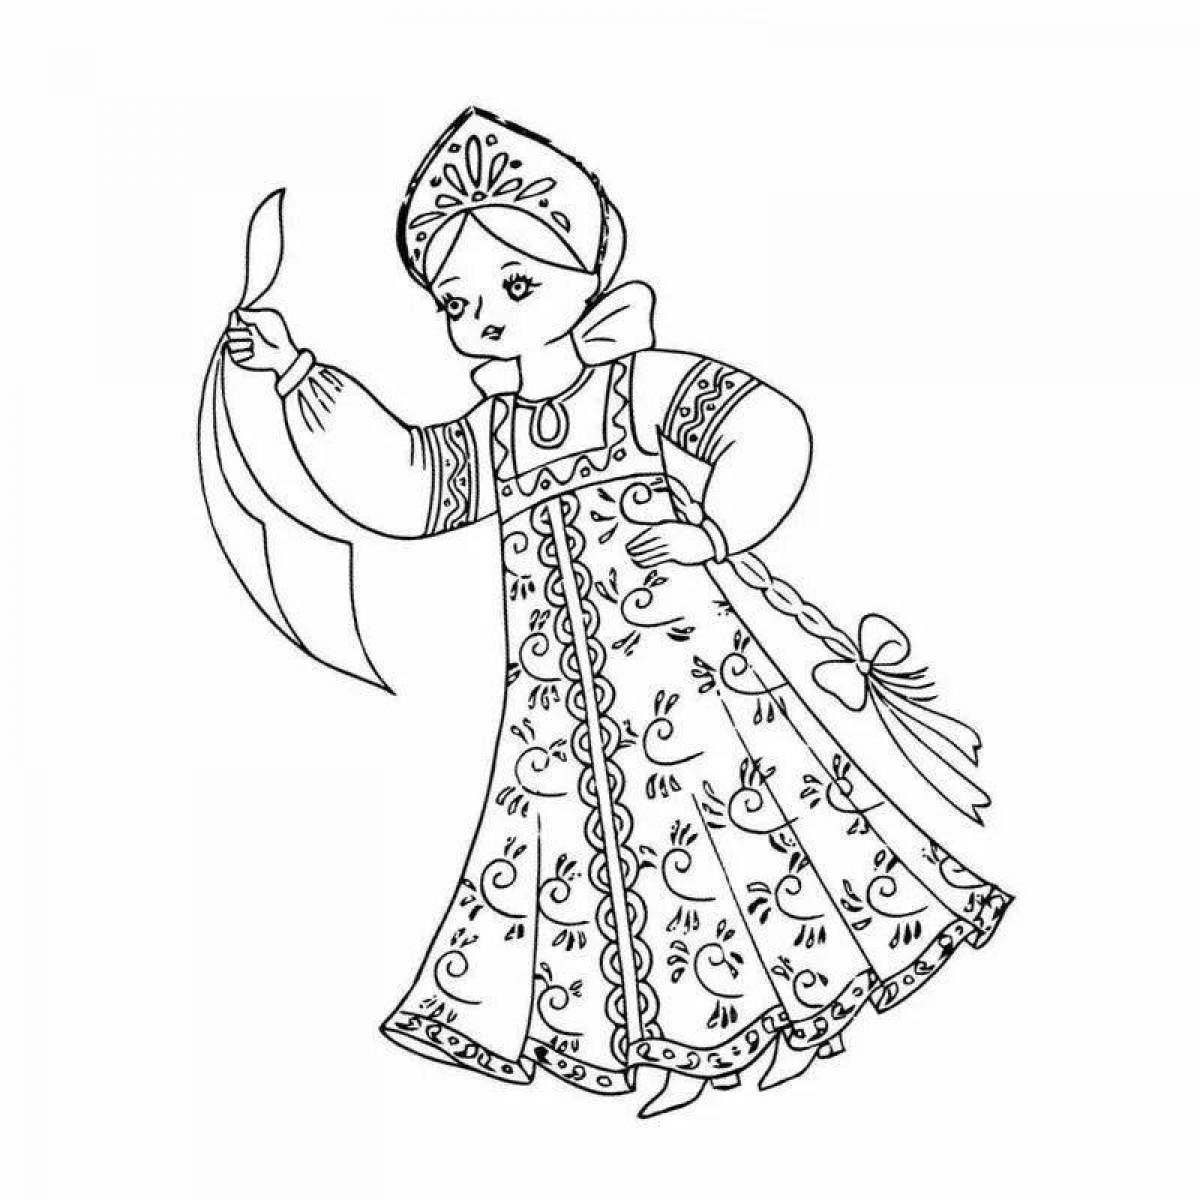 A fascinating coloring book of a girl in a Russian folk costume